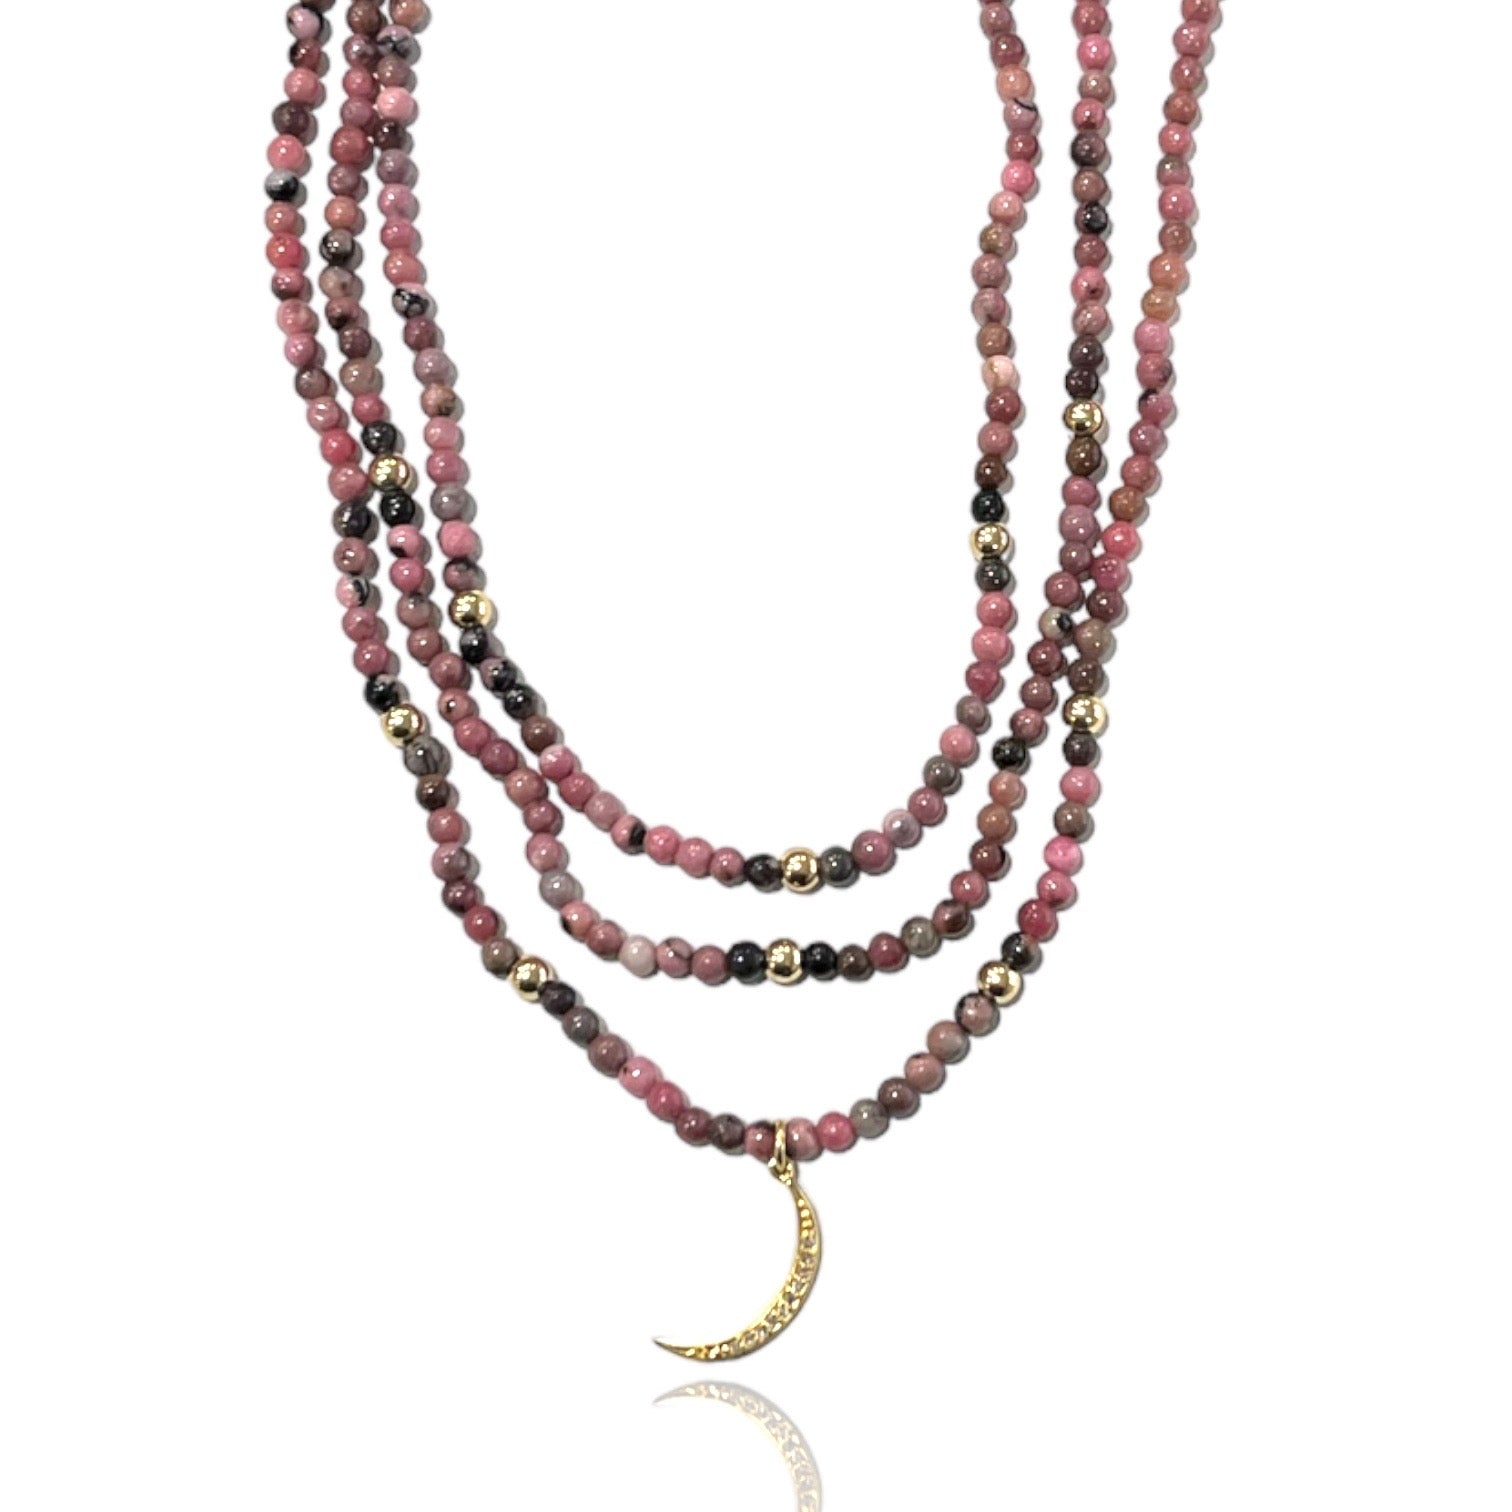 PINK RHODONITE NECKLACE WITH PAVE DIAMOND MOON